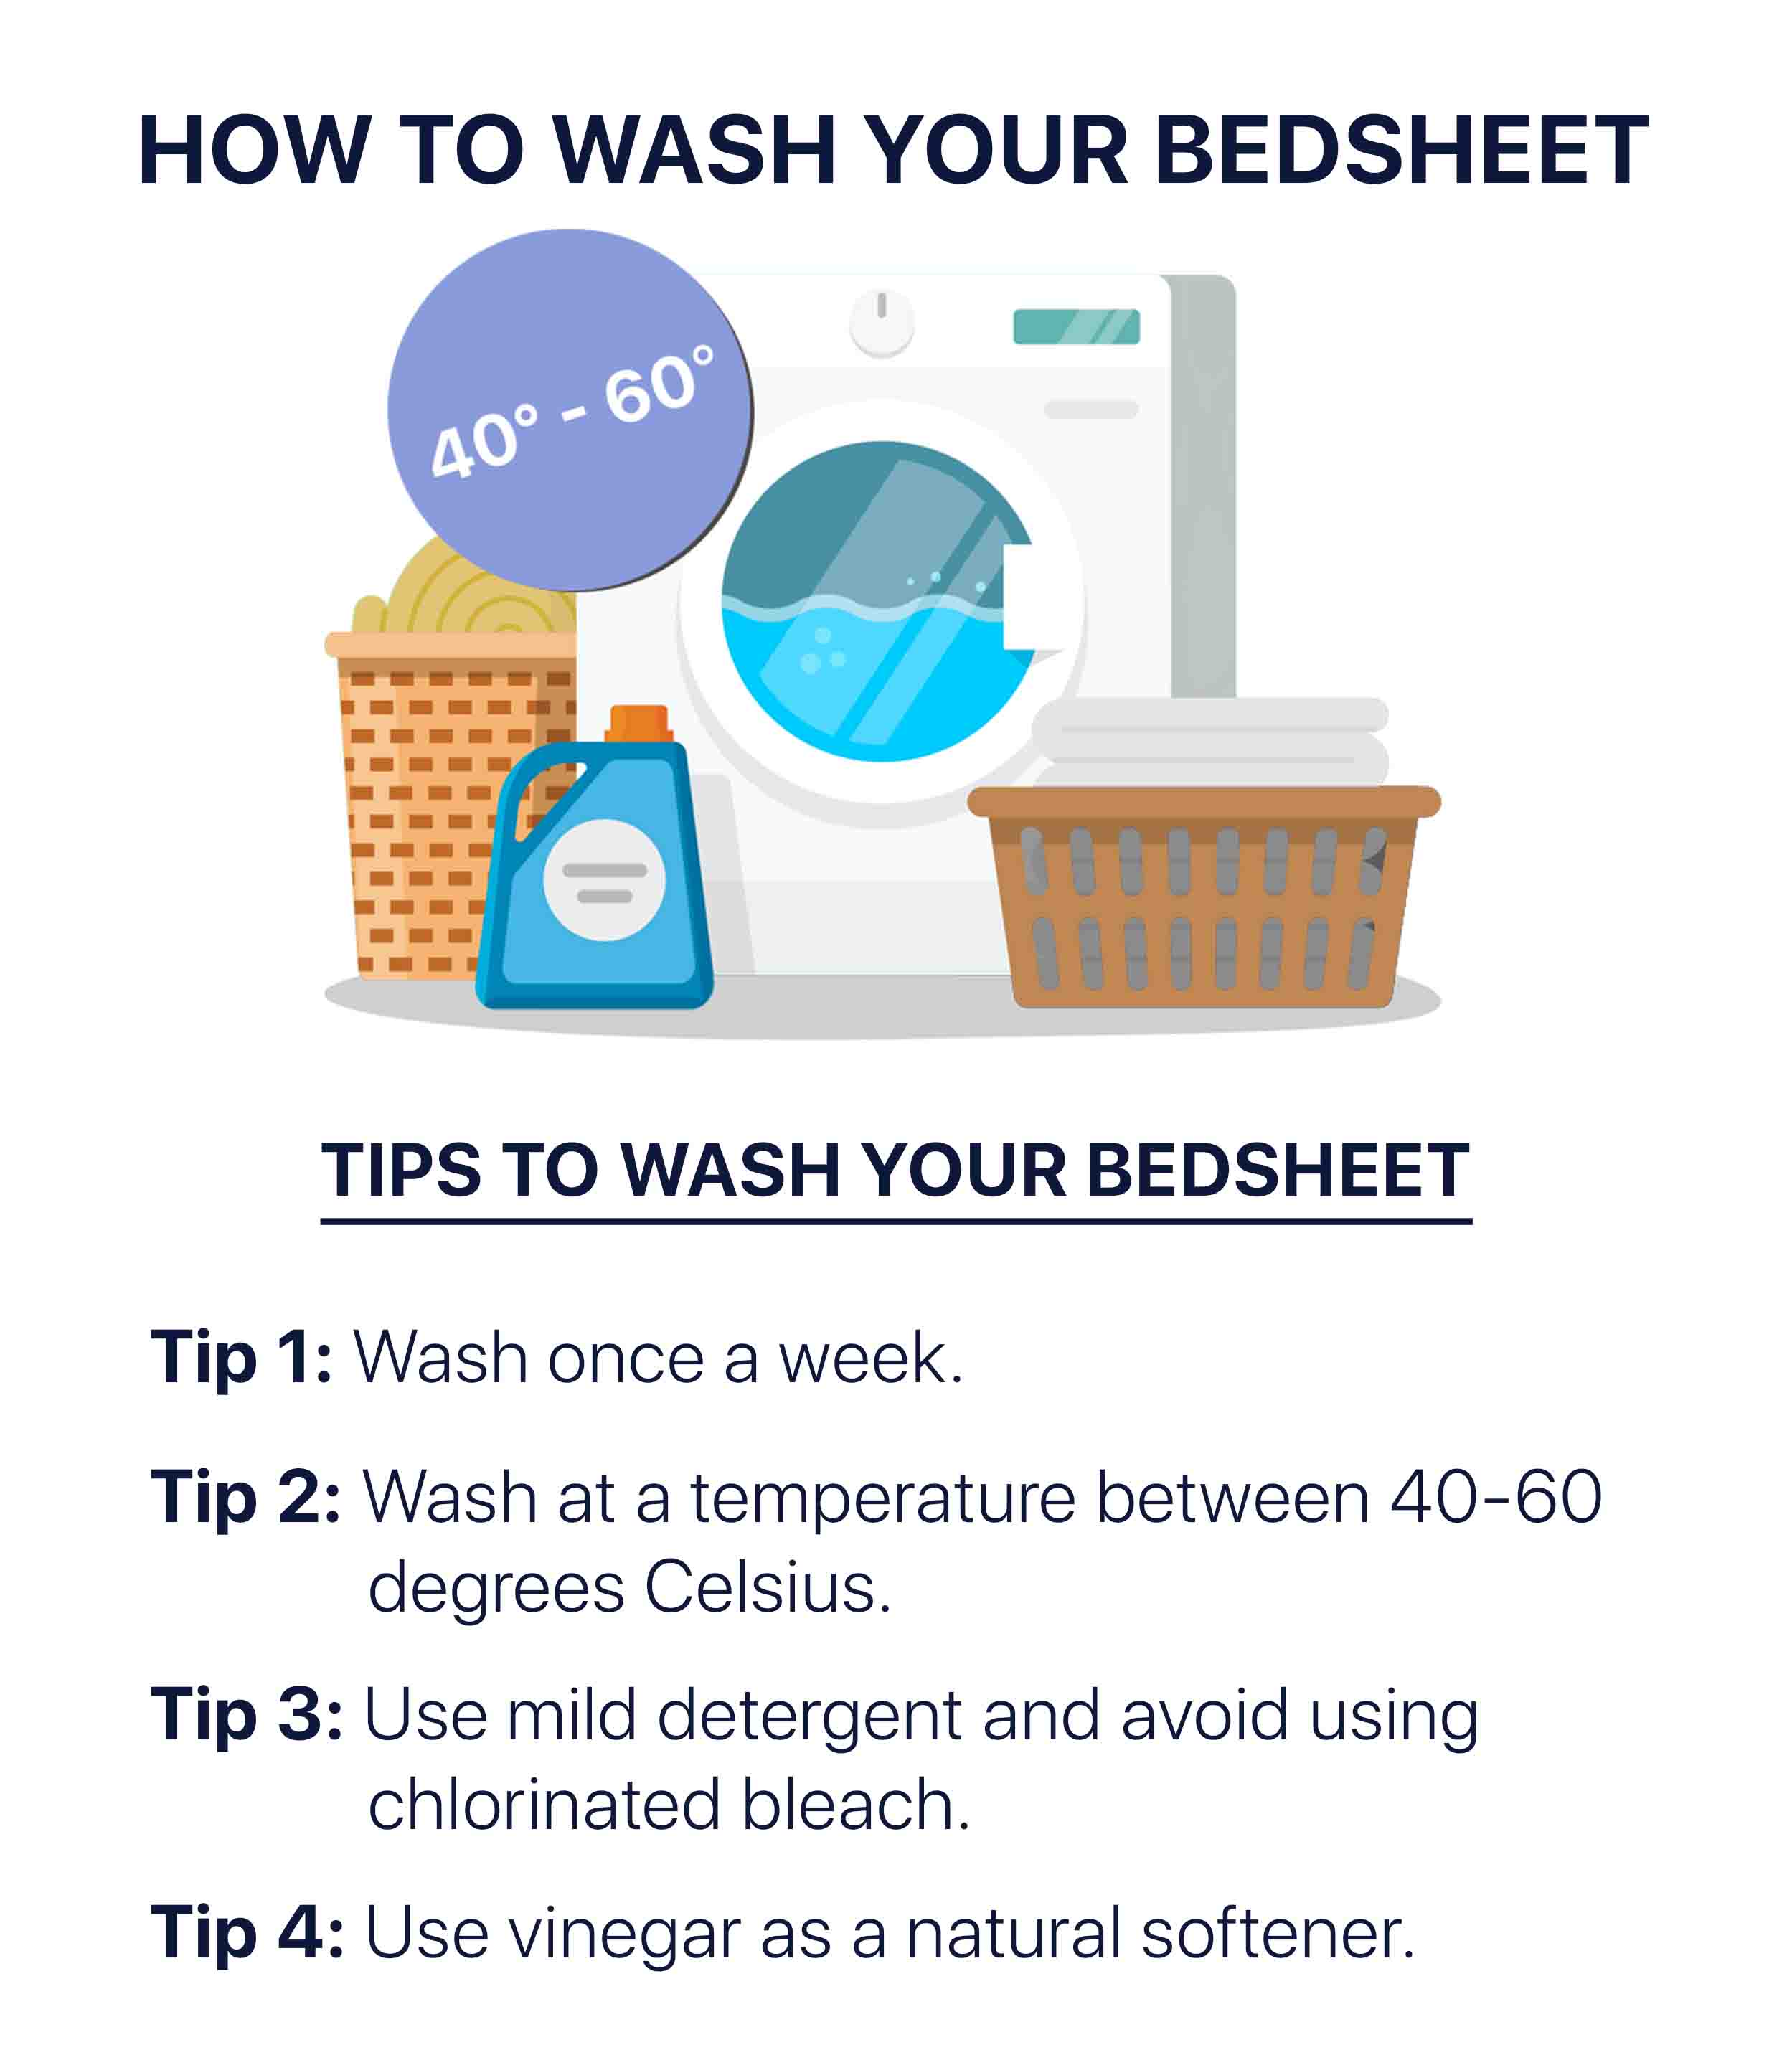 How to wash your Bedsheet